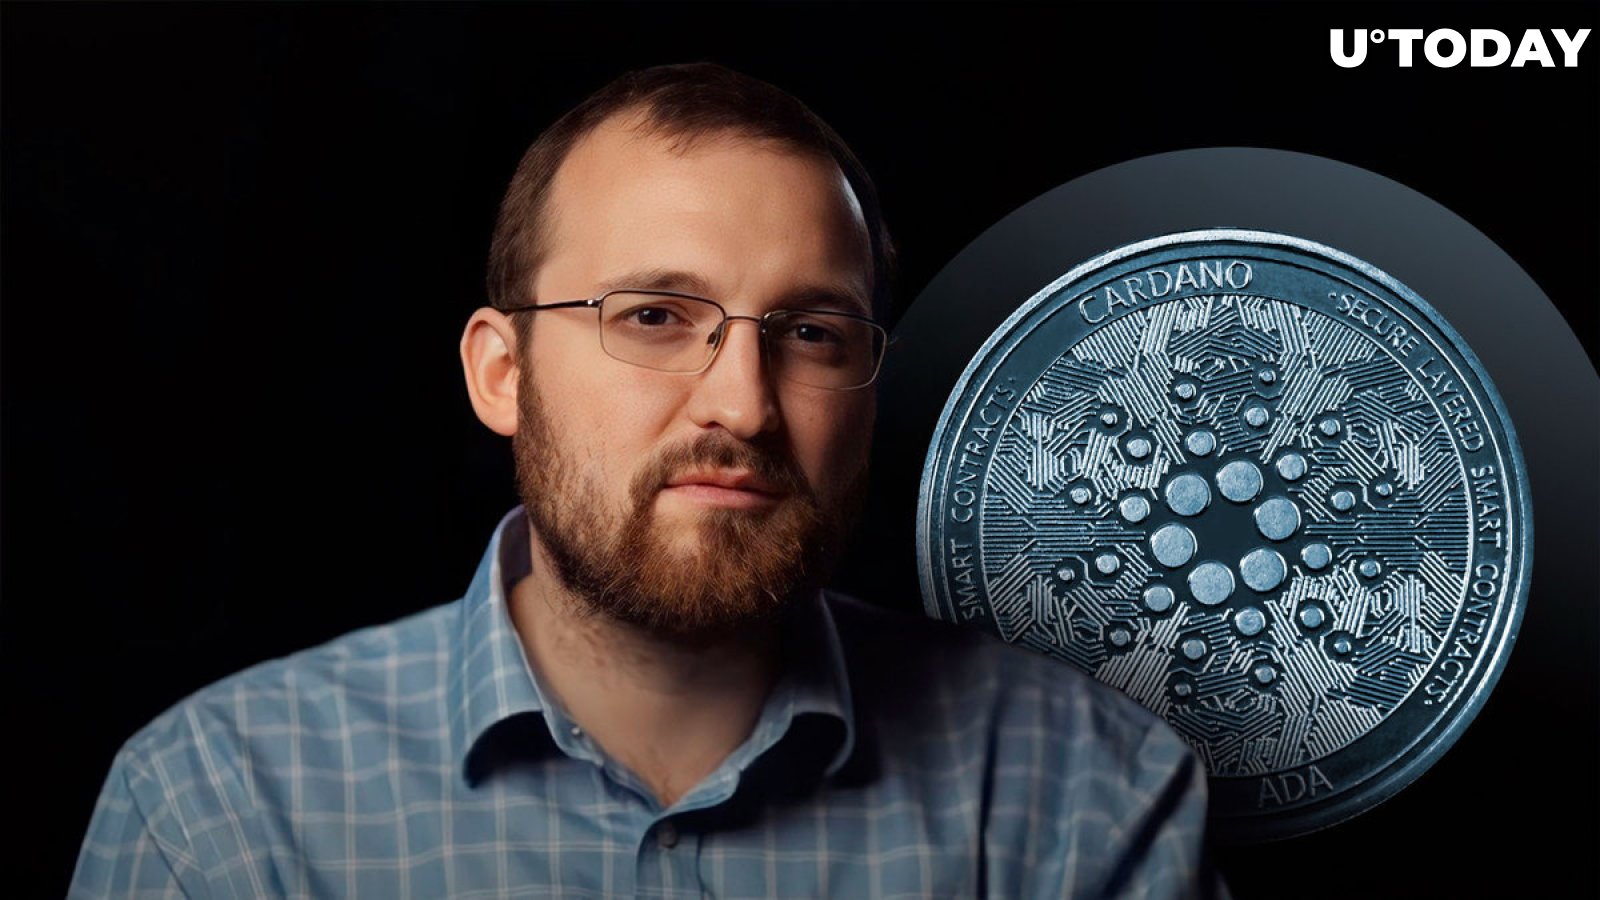 Cardano Founder Responds to ADA Community, But With Warning